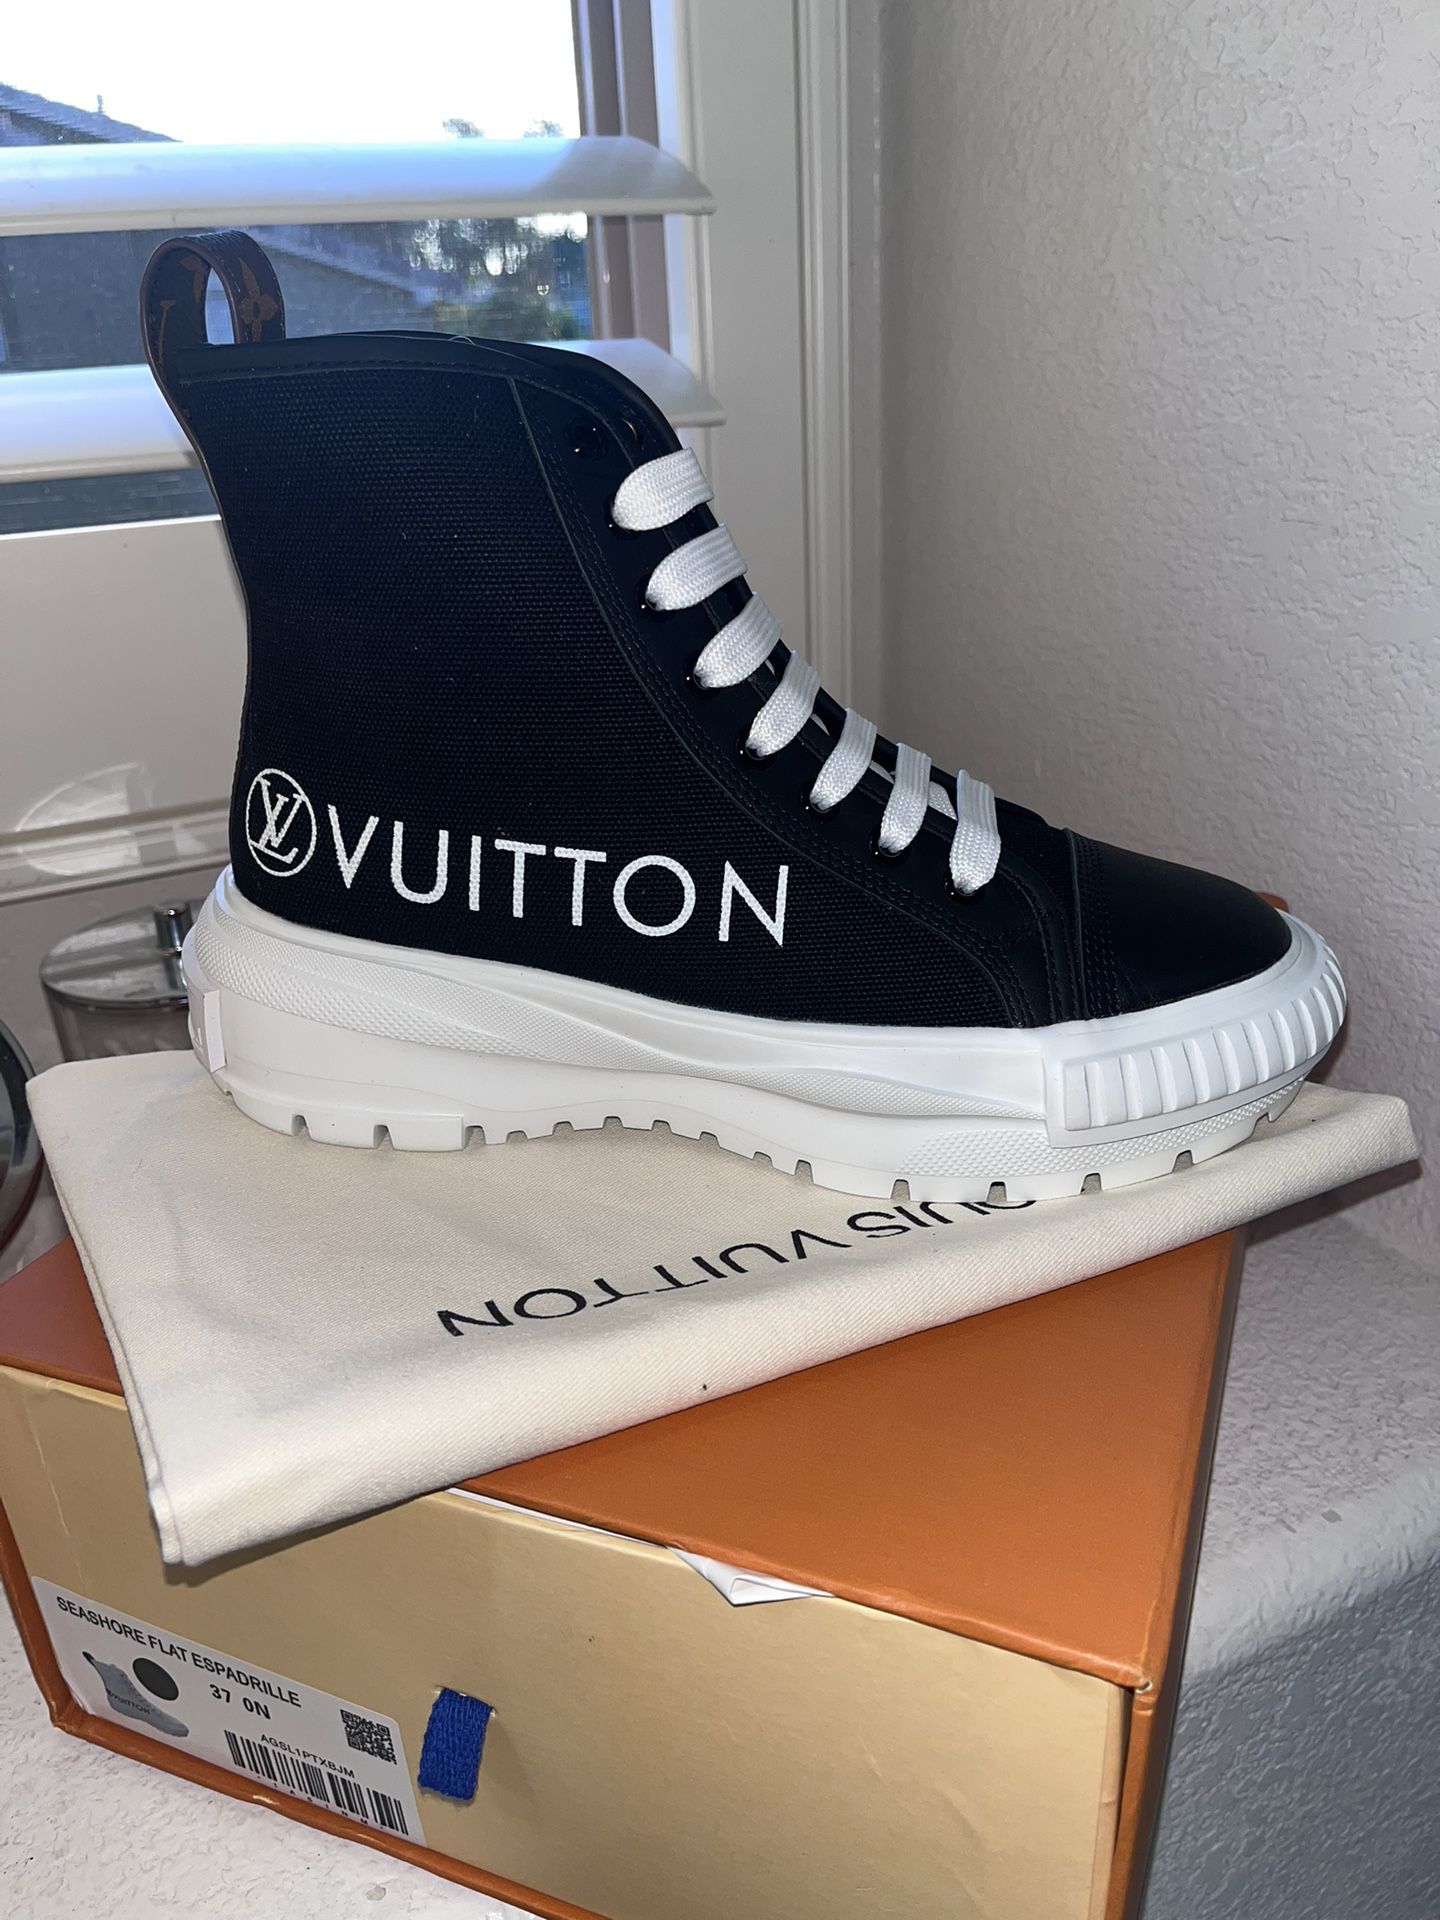 Louis Vuitton Luxembourg Black Sneaker Shoes Men 9 New for Sale in  Fullerton, CA - OfferUp